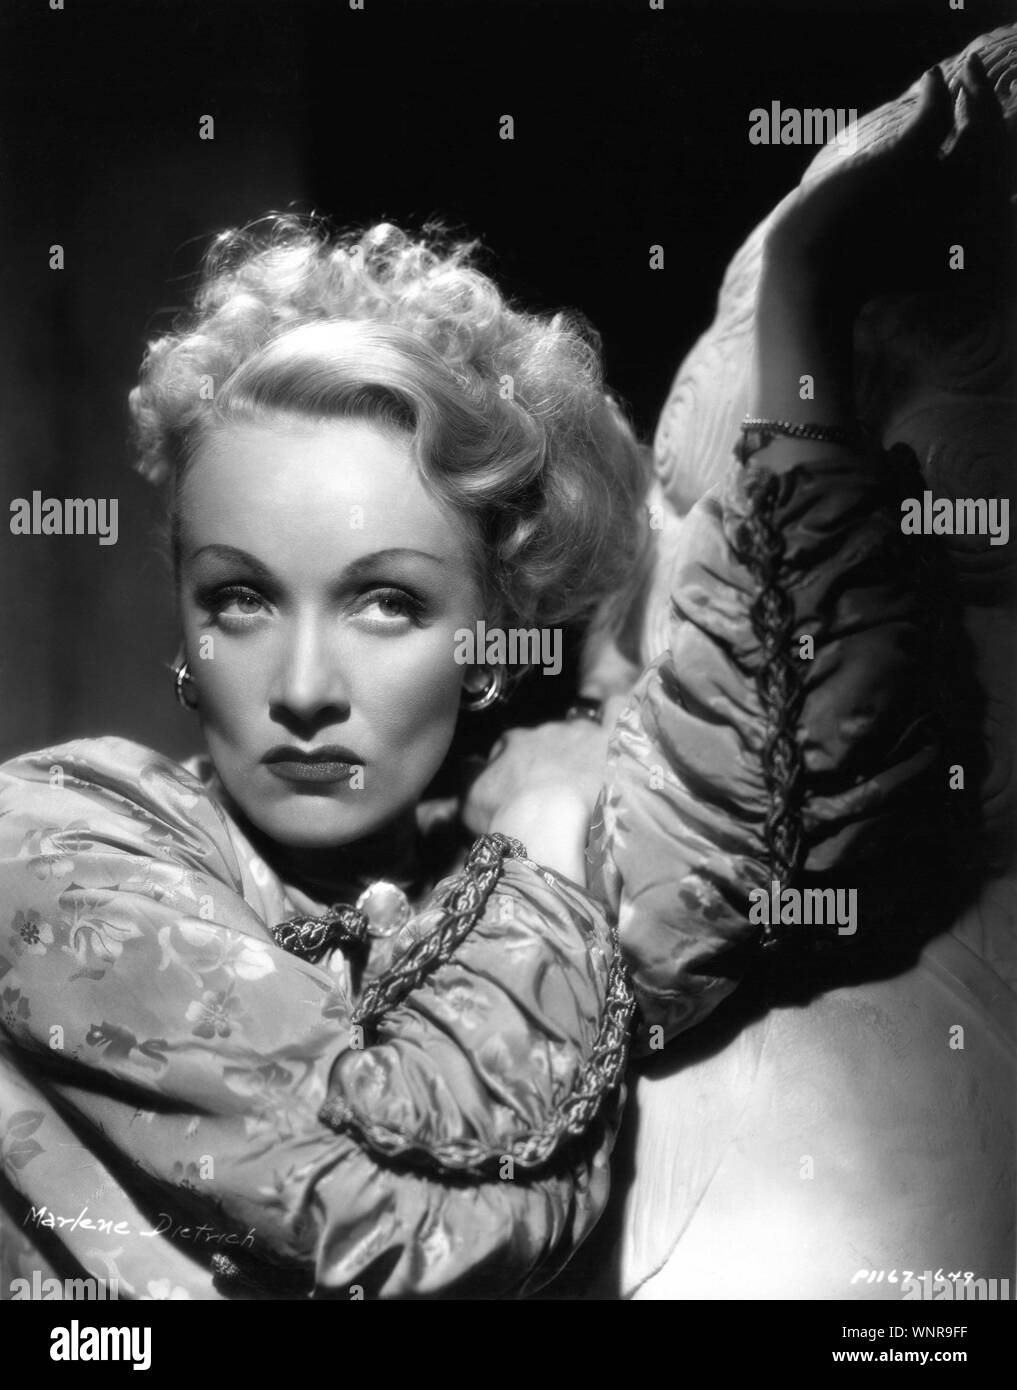 Marlene dietrich german american actress Black and White Stock Photos ...